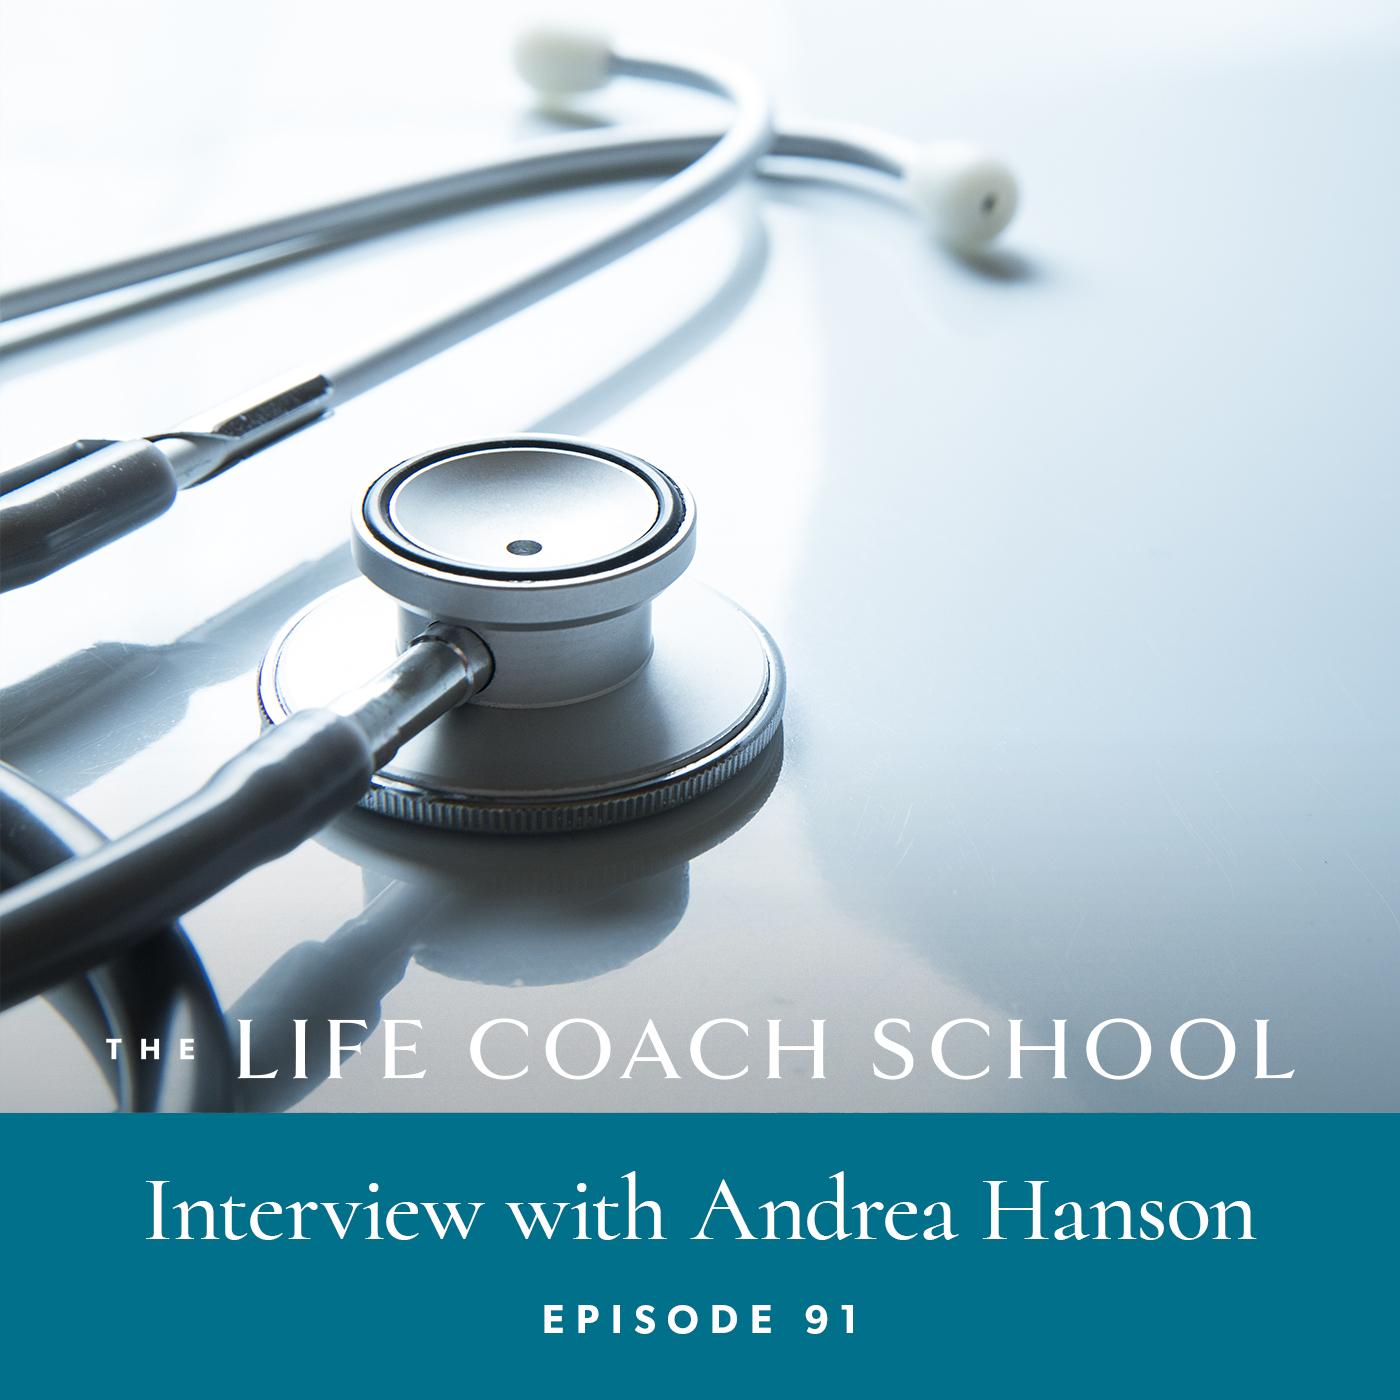 The Life Coach School Podcast with Brooke Castillo | Episode 91 | Interview with Andrea Hanson